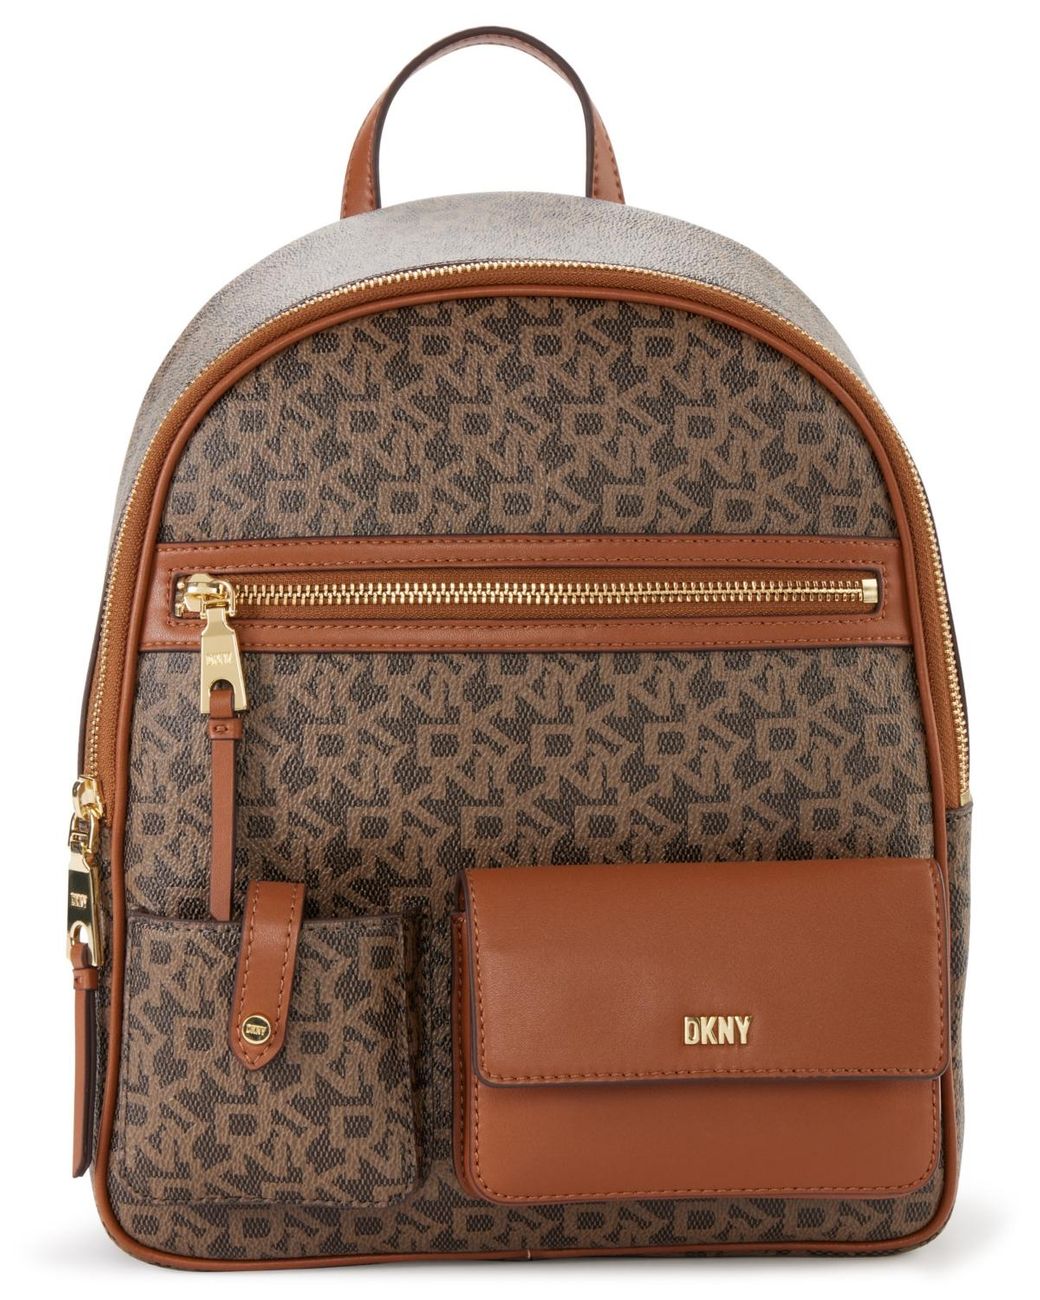 DKNY Zyon Multiple Compartment Backpack in Brown | Lyst